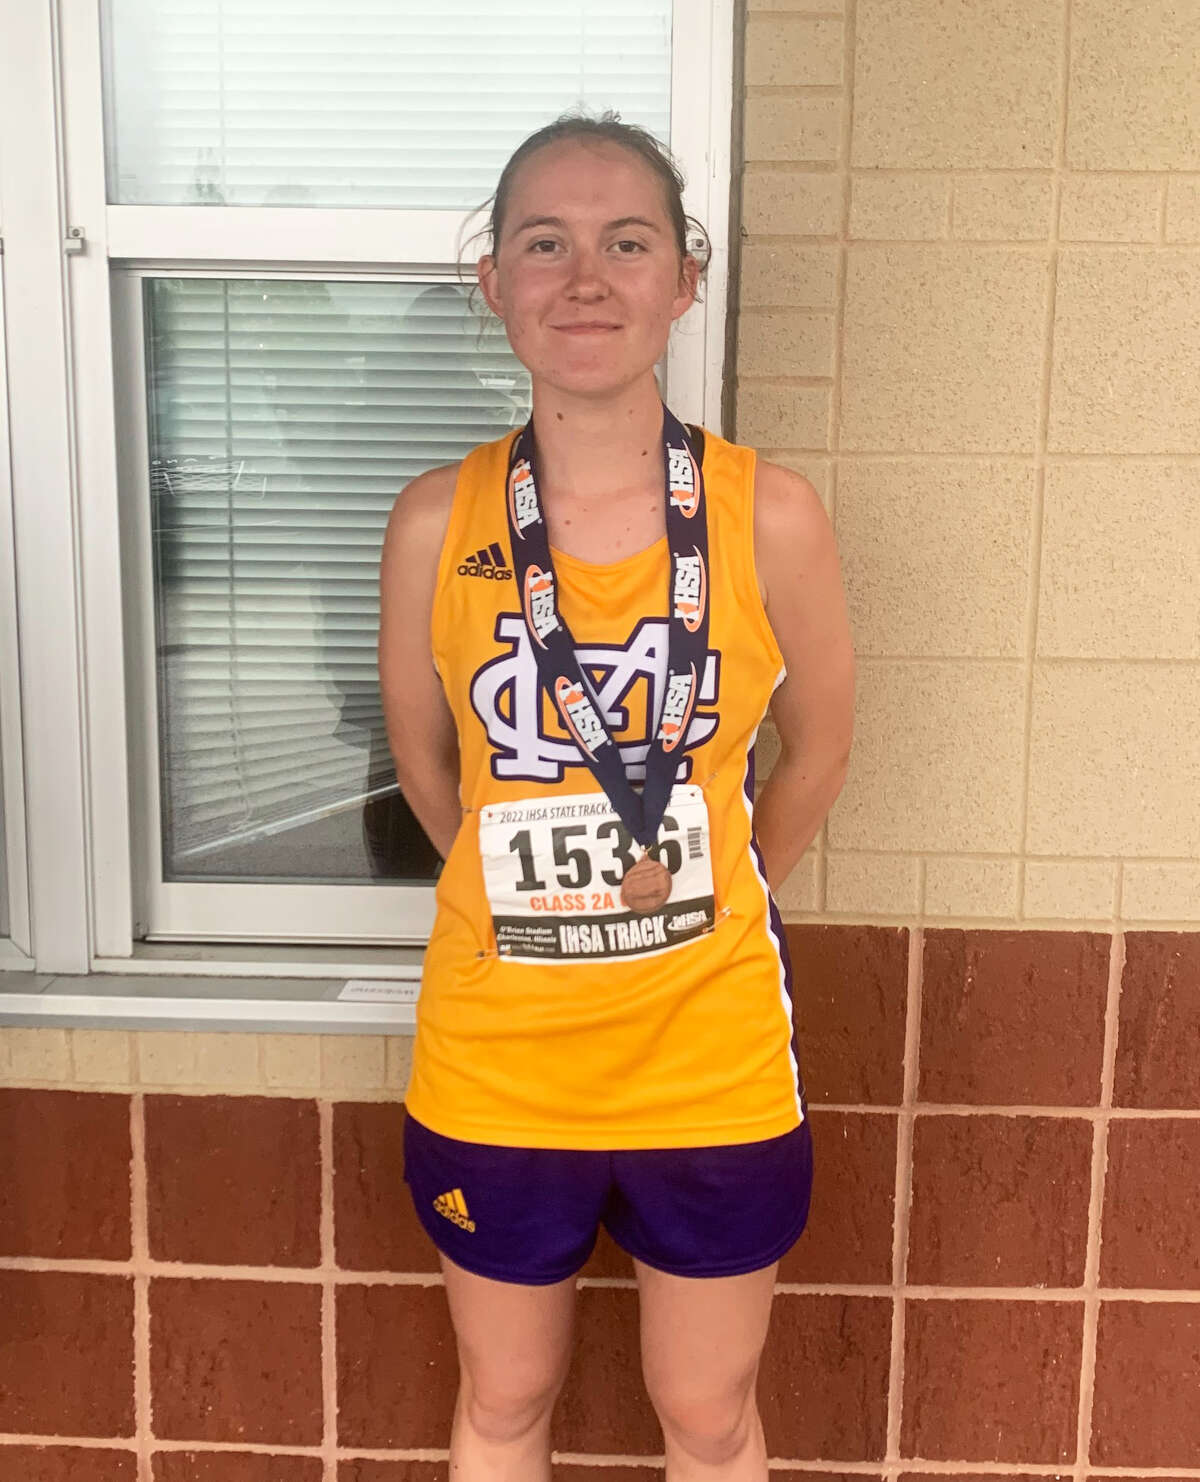 Hannah Meiser became the first runner in school history to medal when she placed ninth in the 1,600-meter run at the Class 2A state track meet at Eastern Illinois University on Saturday.